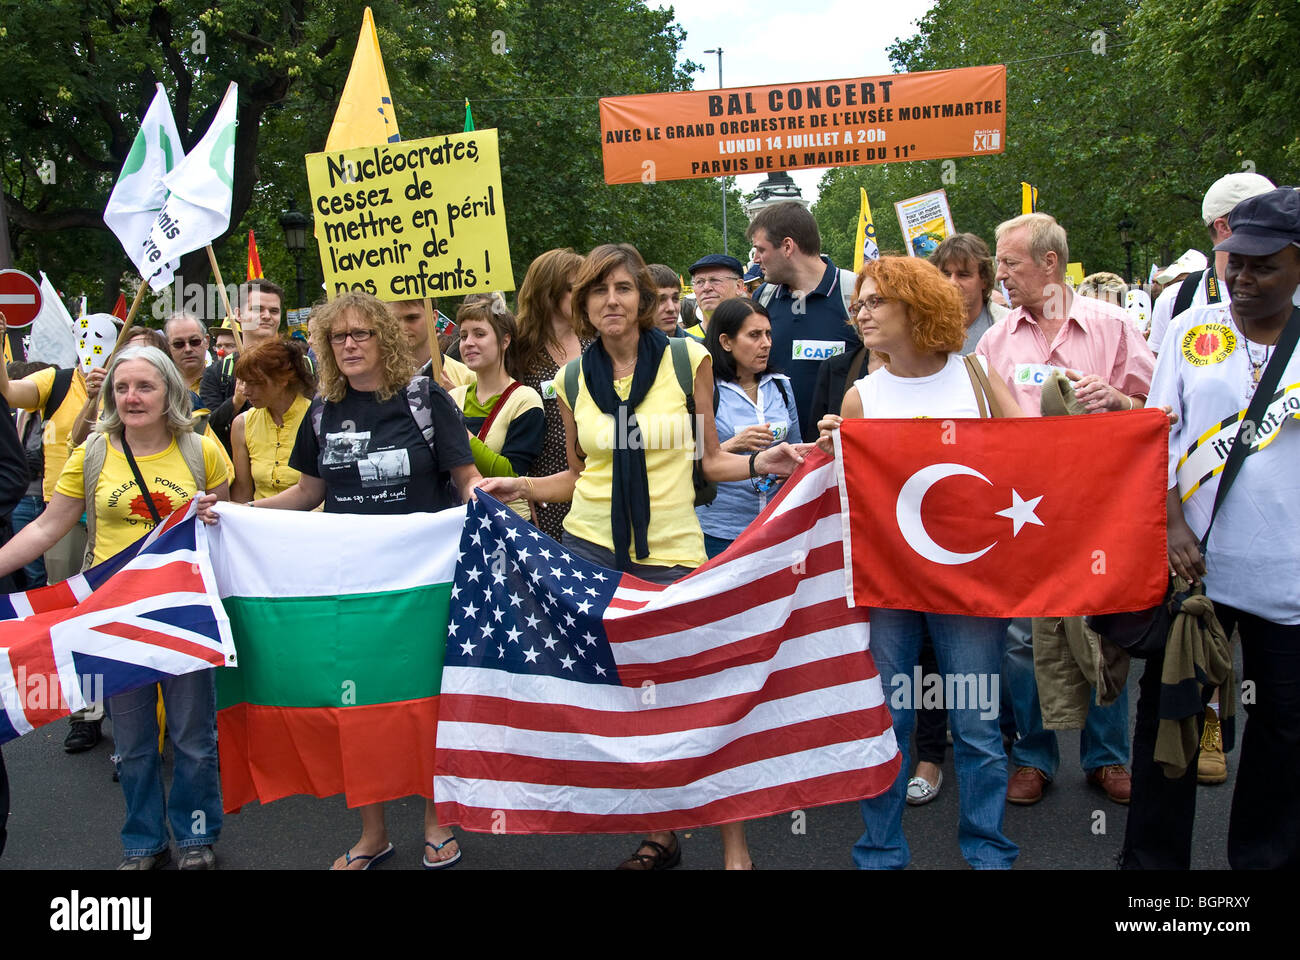 Paris, FRANCE - Anti-Nuclear Power Demonstration by Several Environmental N.G.O's. Crowd Activists Marching, Holding Flags, women marching, women politics Stock Photo